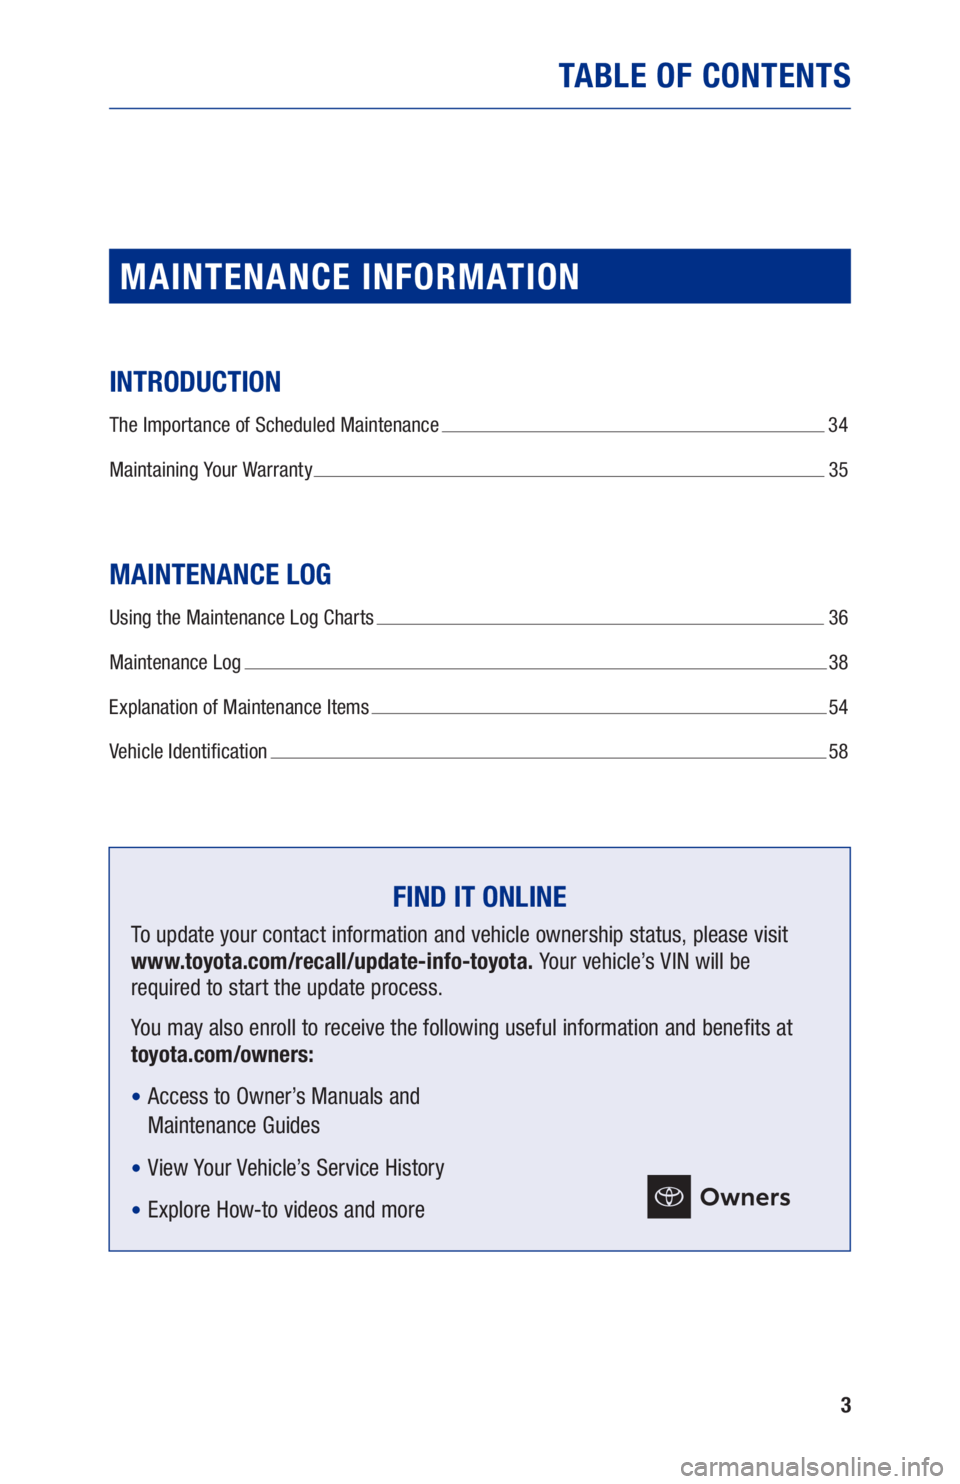 TOYOTA AVALON HYBRID 2021  Warranties & Maintenance Guides (in English) 3
TABLE OF CONTENTS
MAINTENANCE INFORMATION
INTRODUCTION
The Importance of Scheduled Maintenance  34
Maintaining Your Warranty 
  35
MAINTENANCE LOG
Using the Maintenance Log Charts   36
Maintenance L